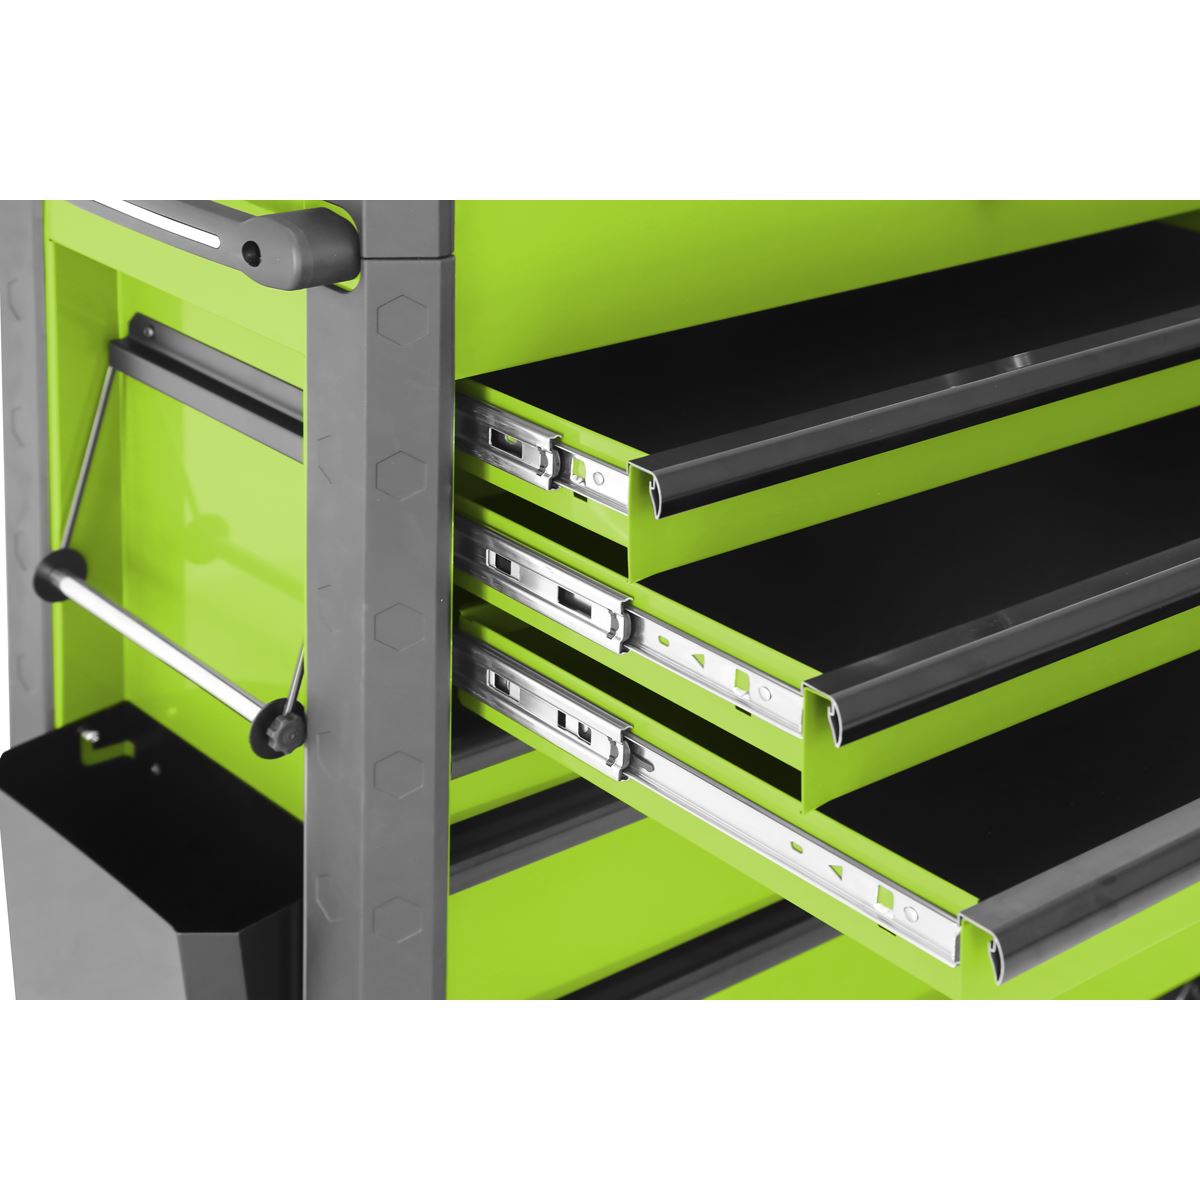 Sealey Superline Pro Tool Trolley 6 Drawer with Ball Bearing Slides - Green